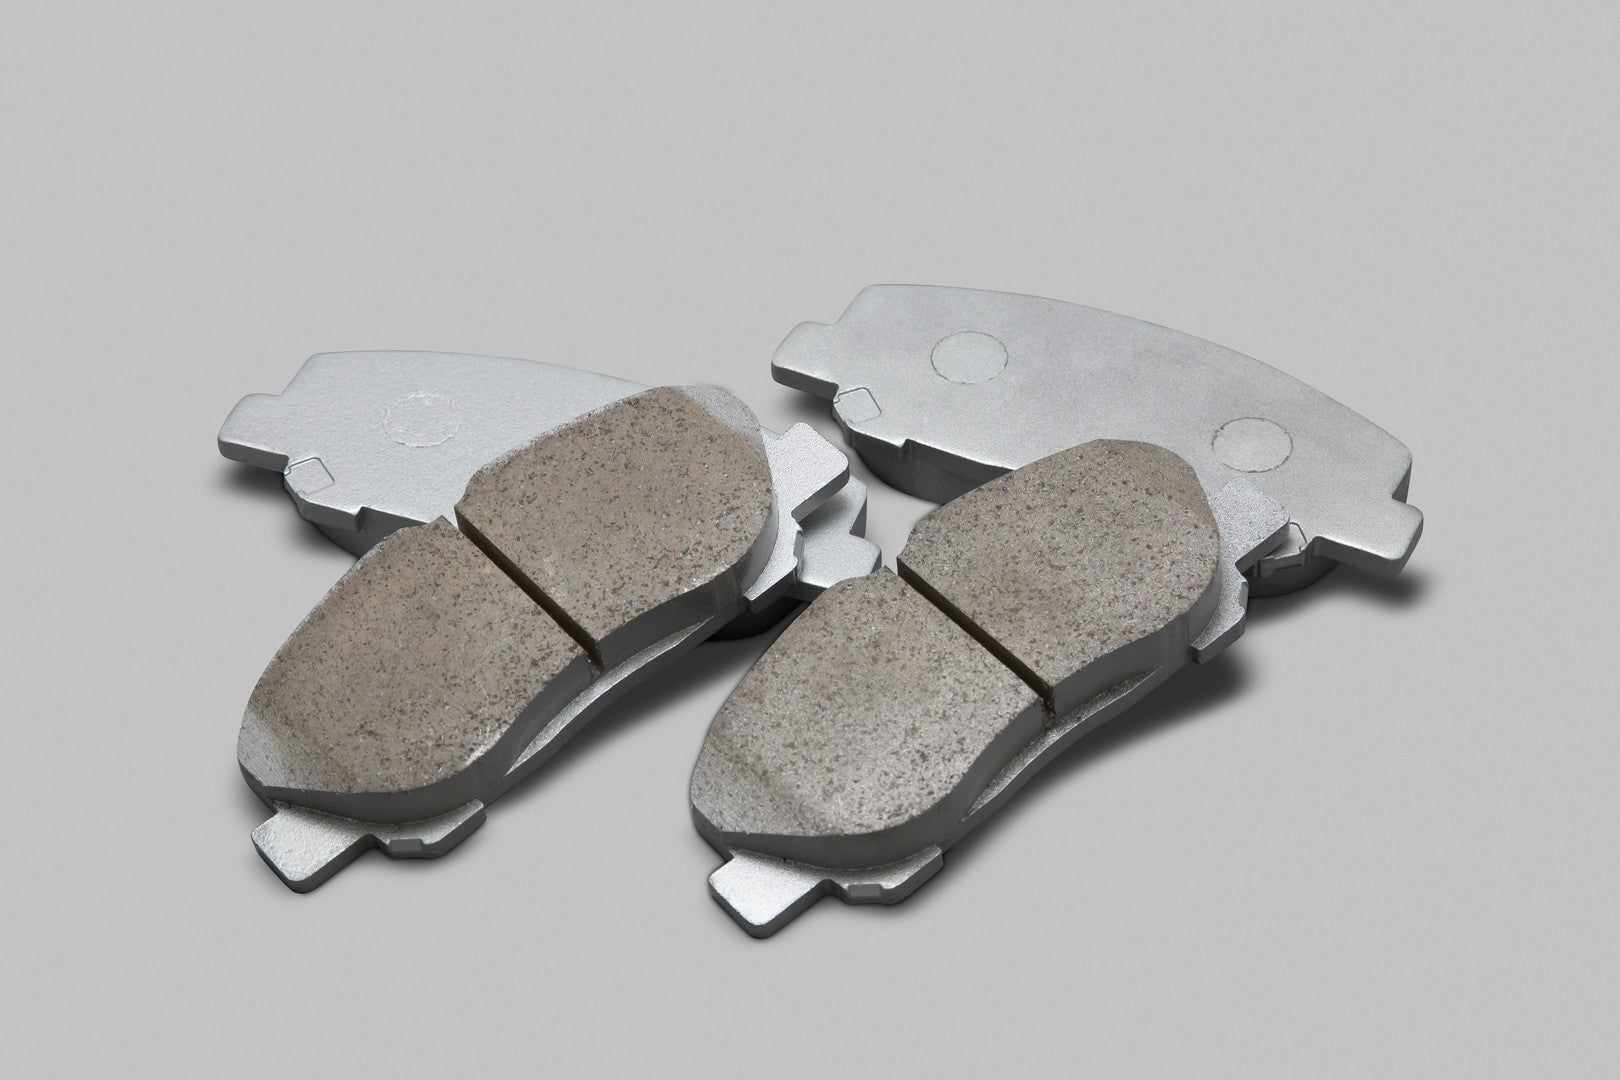 TOM'S Racing- Rear Brake Pads (Performer) for Lexus GS, IS, RC